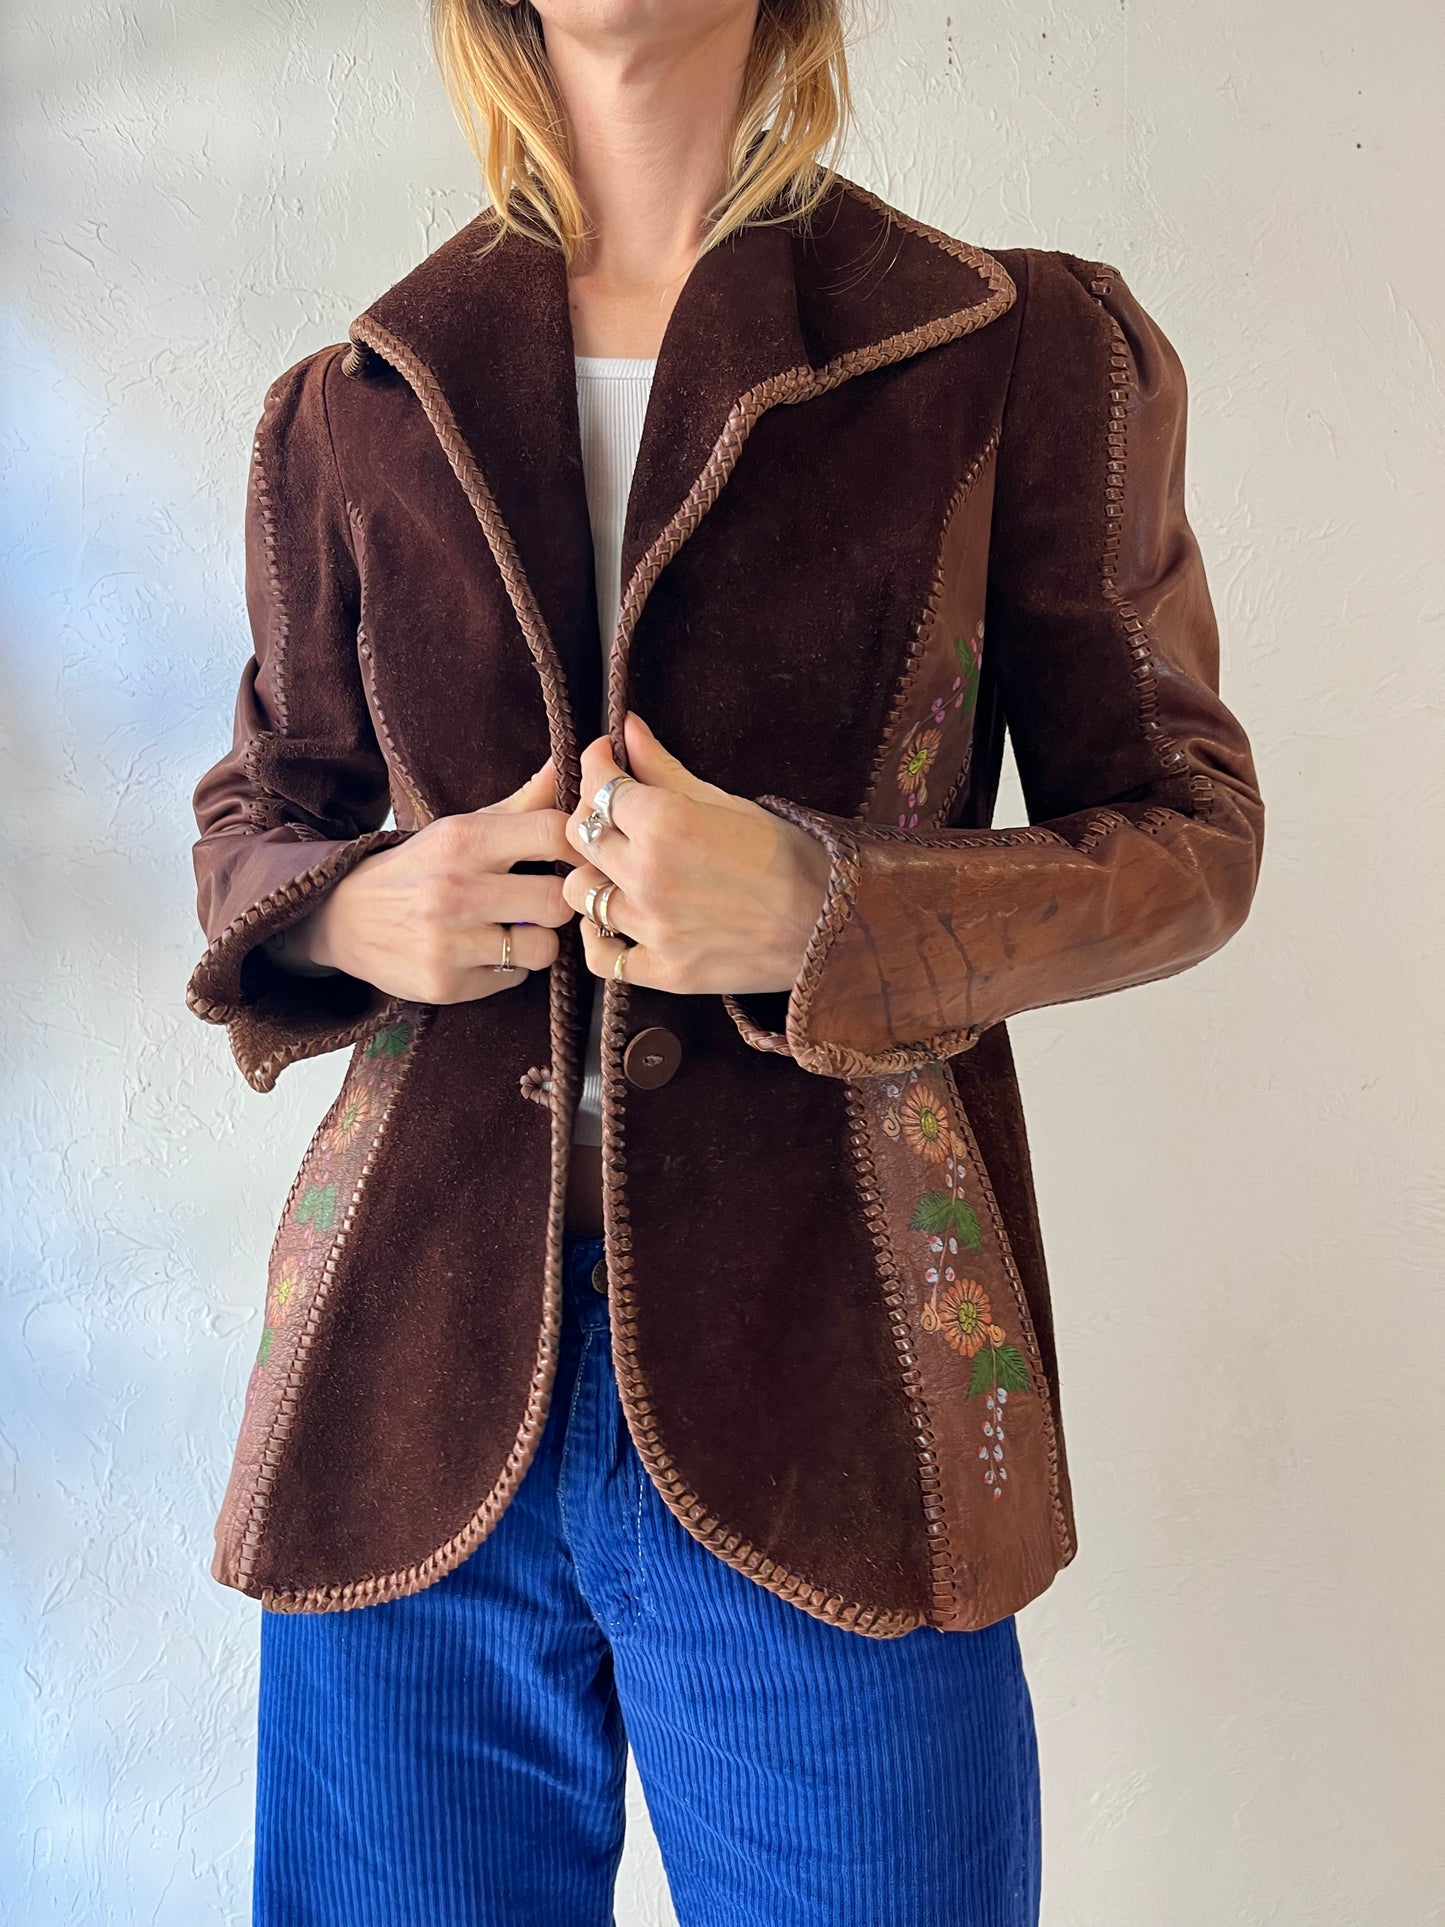 Vintage Hand Painted Brown Suede Leather Jacket / Small